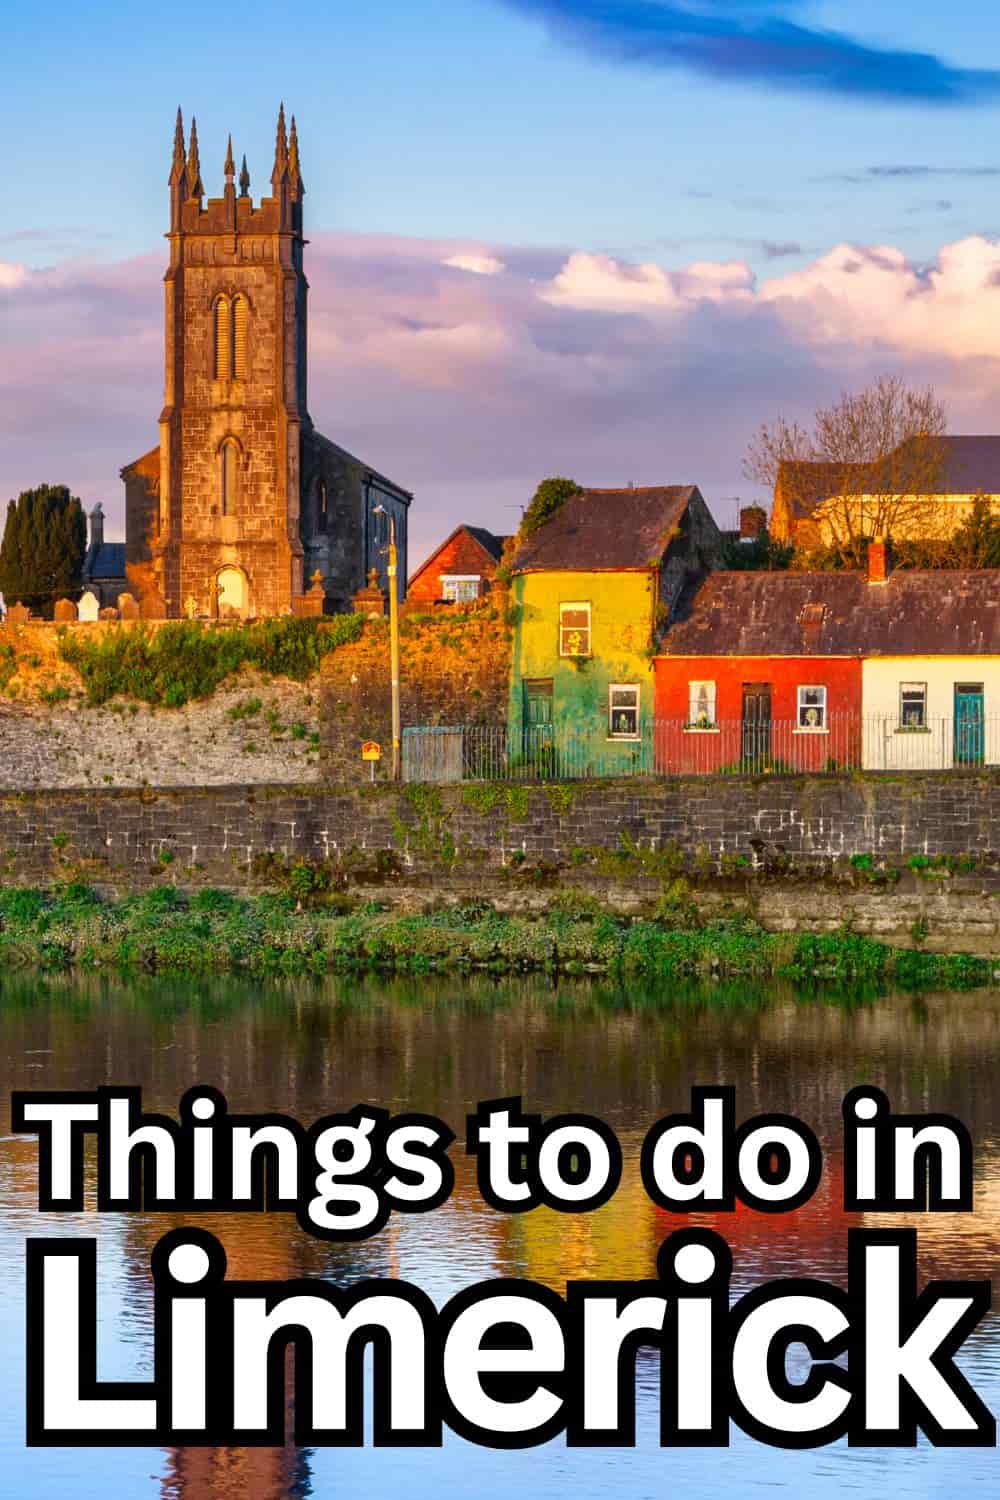 15 Things to Do in Limerick, Ireland